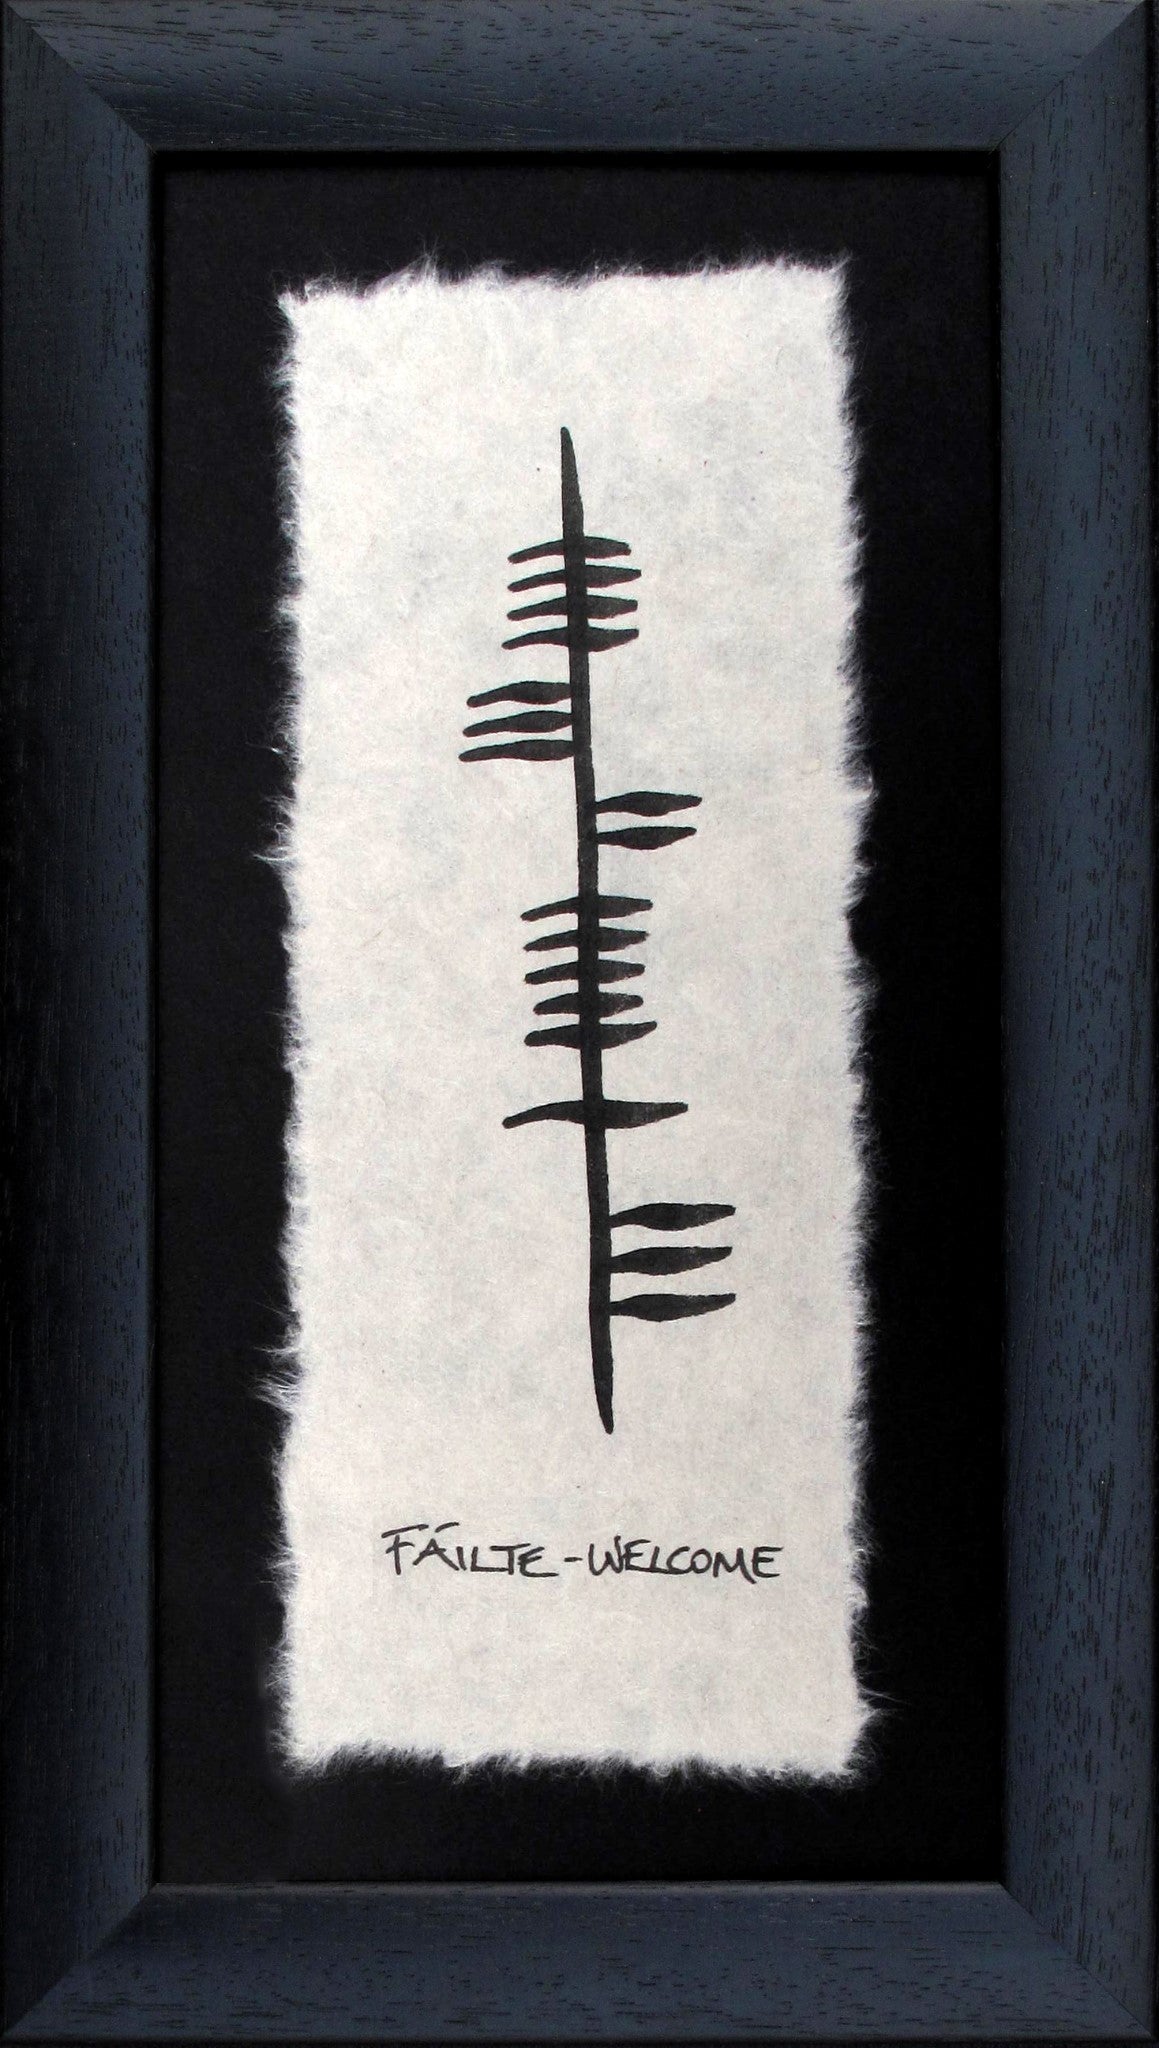 Ogham Wishes - Welcome, Faite